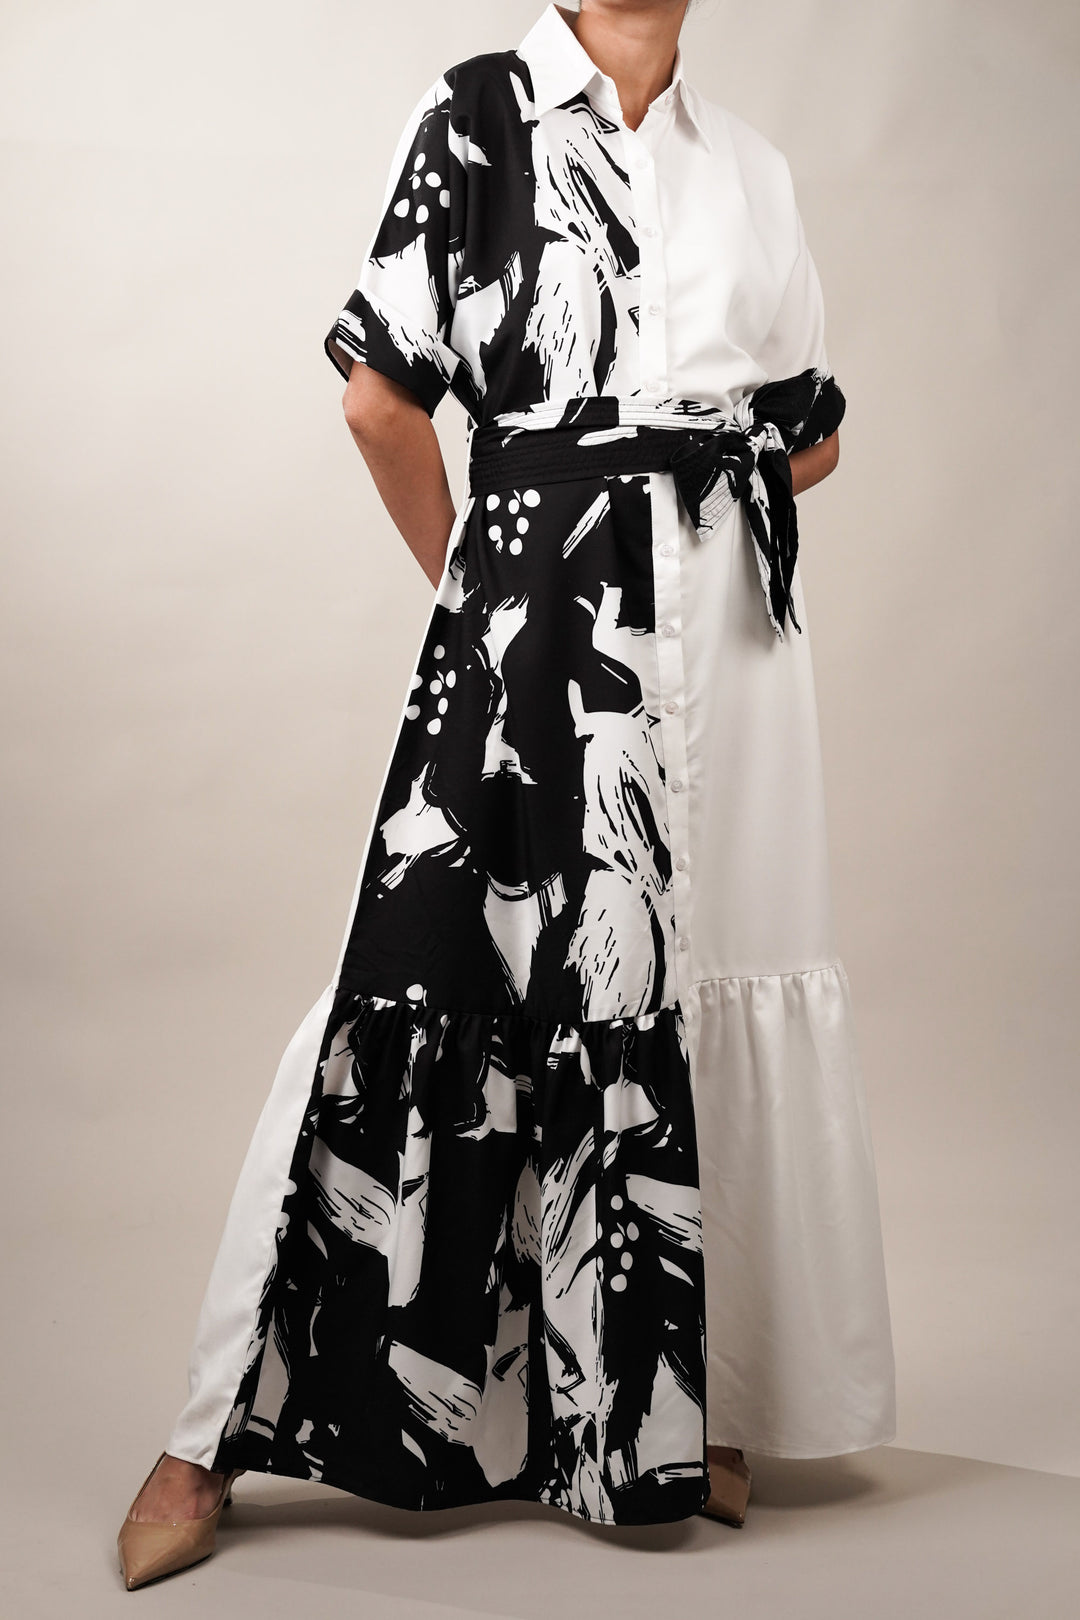 Black and white tiered maxi shirt dress for summer